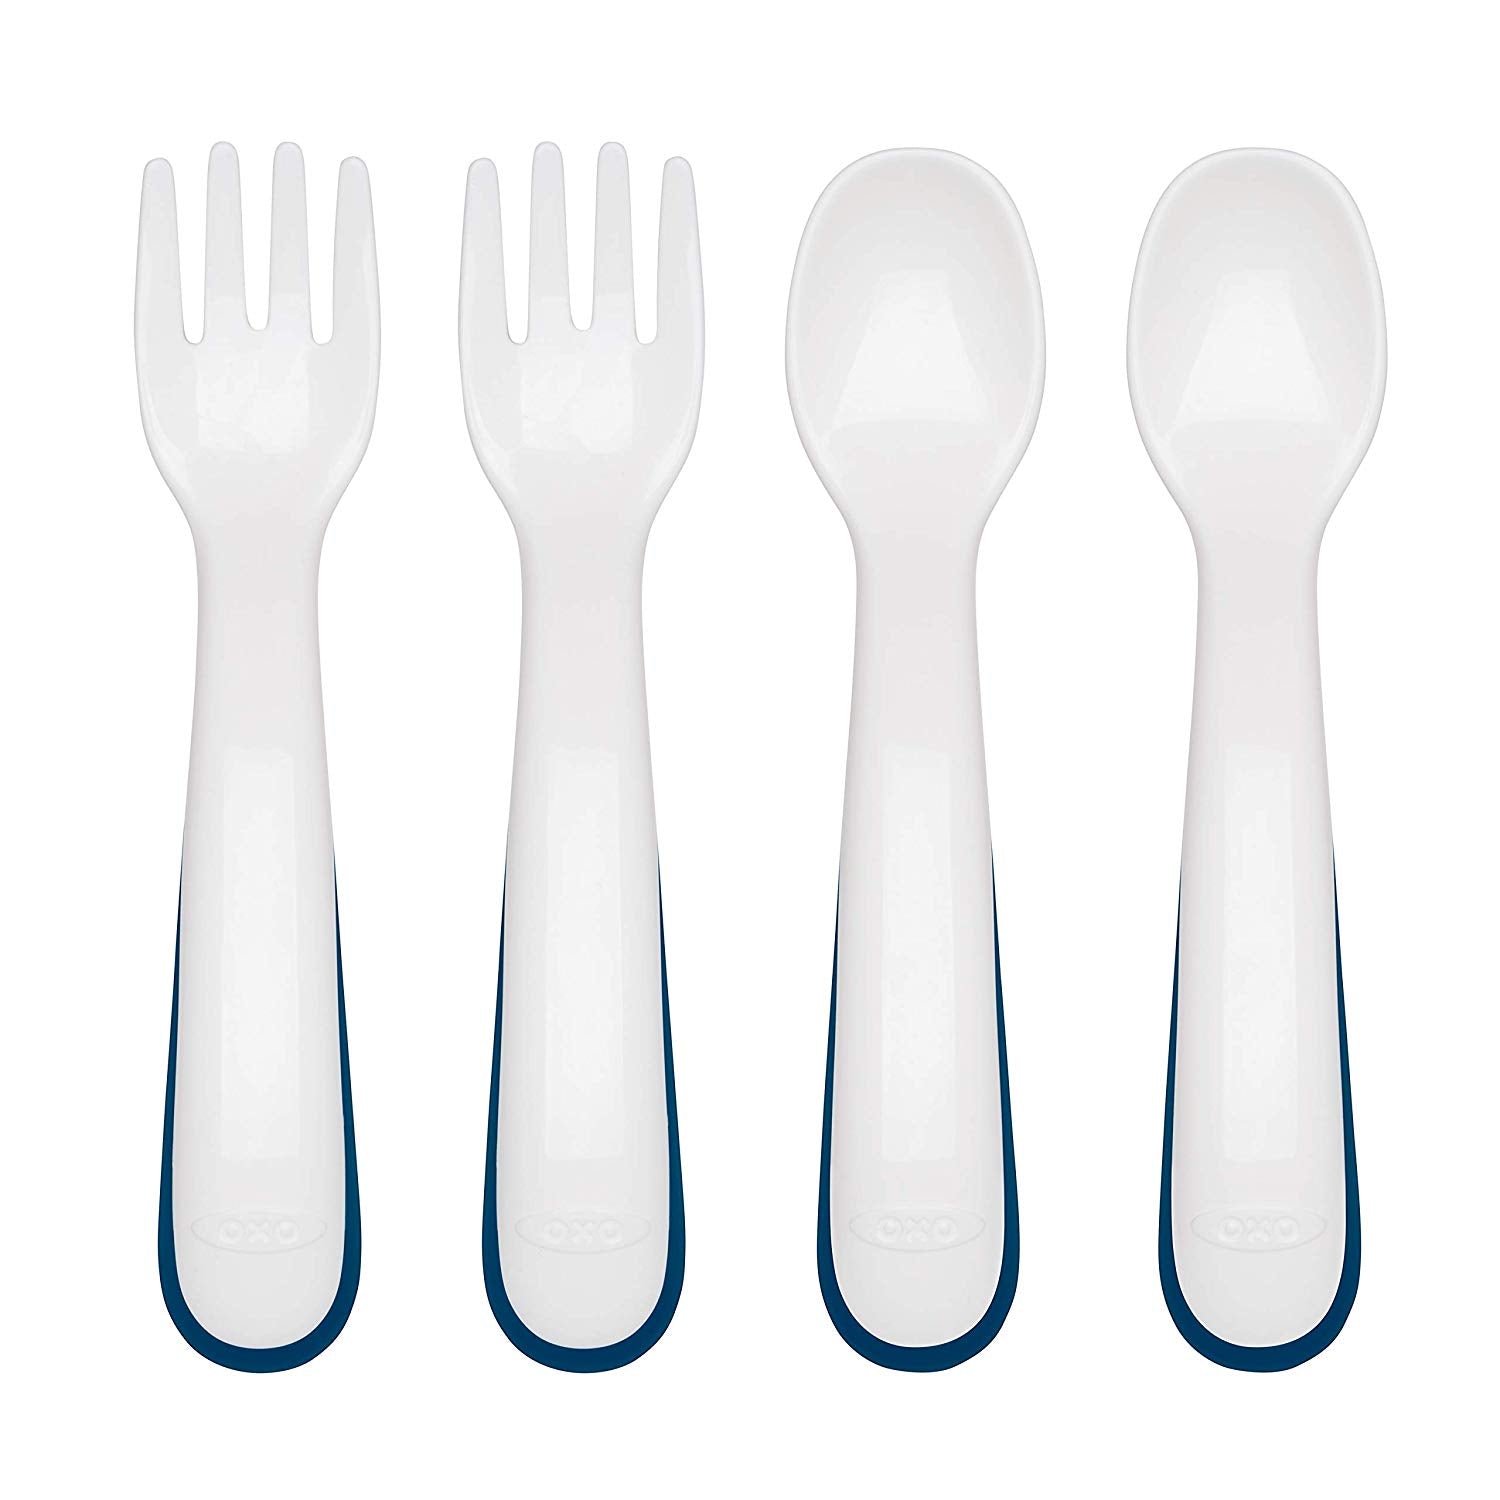 OXO TOT Plastic Fork And Spoon Training Set - ANB Baby -Baby Fork Spoon Set